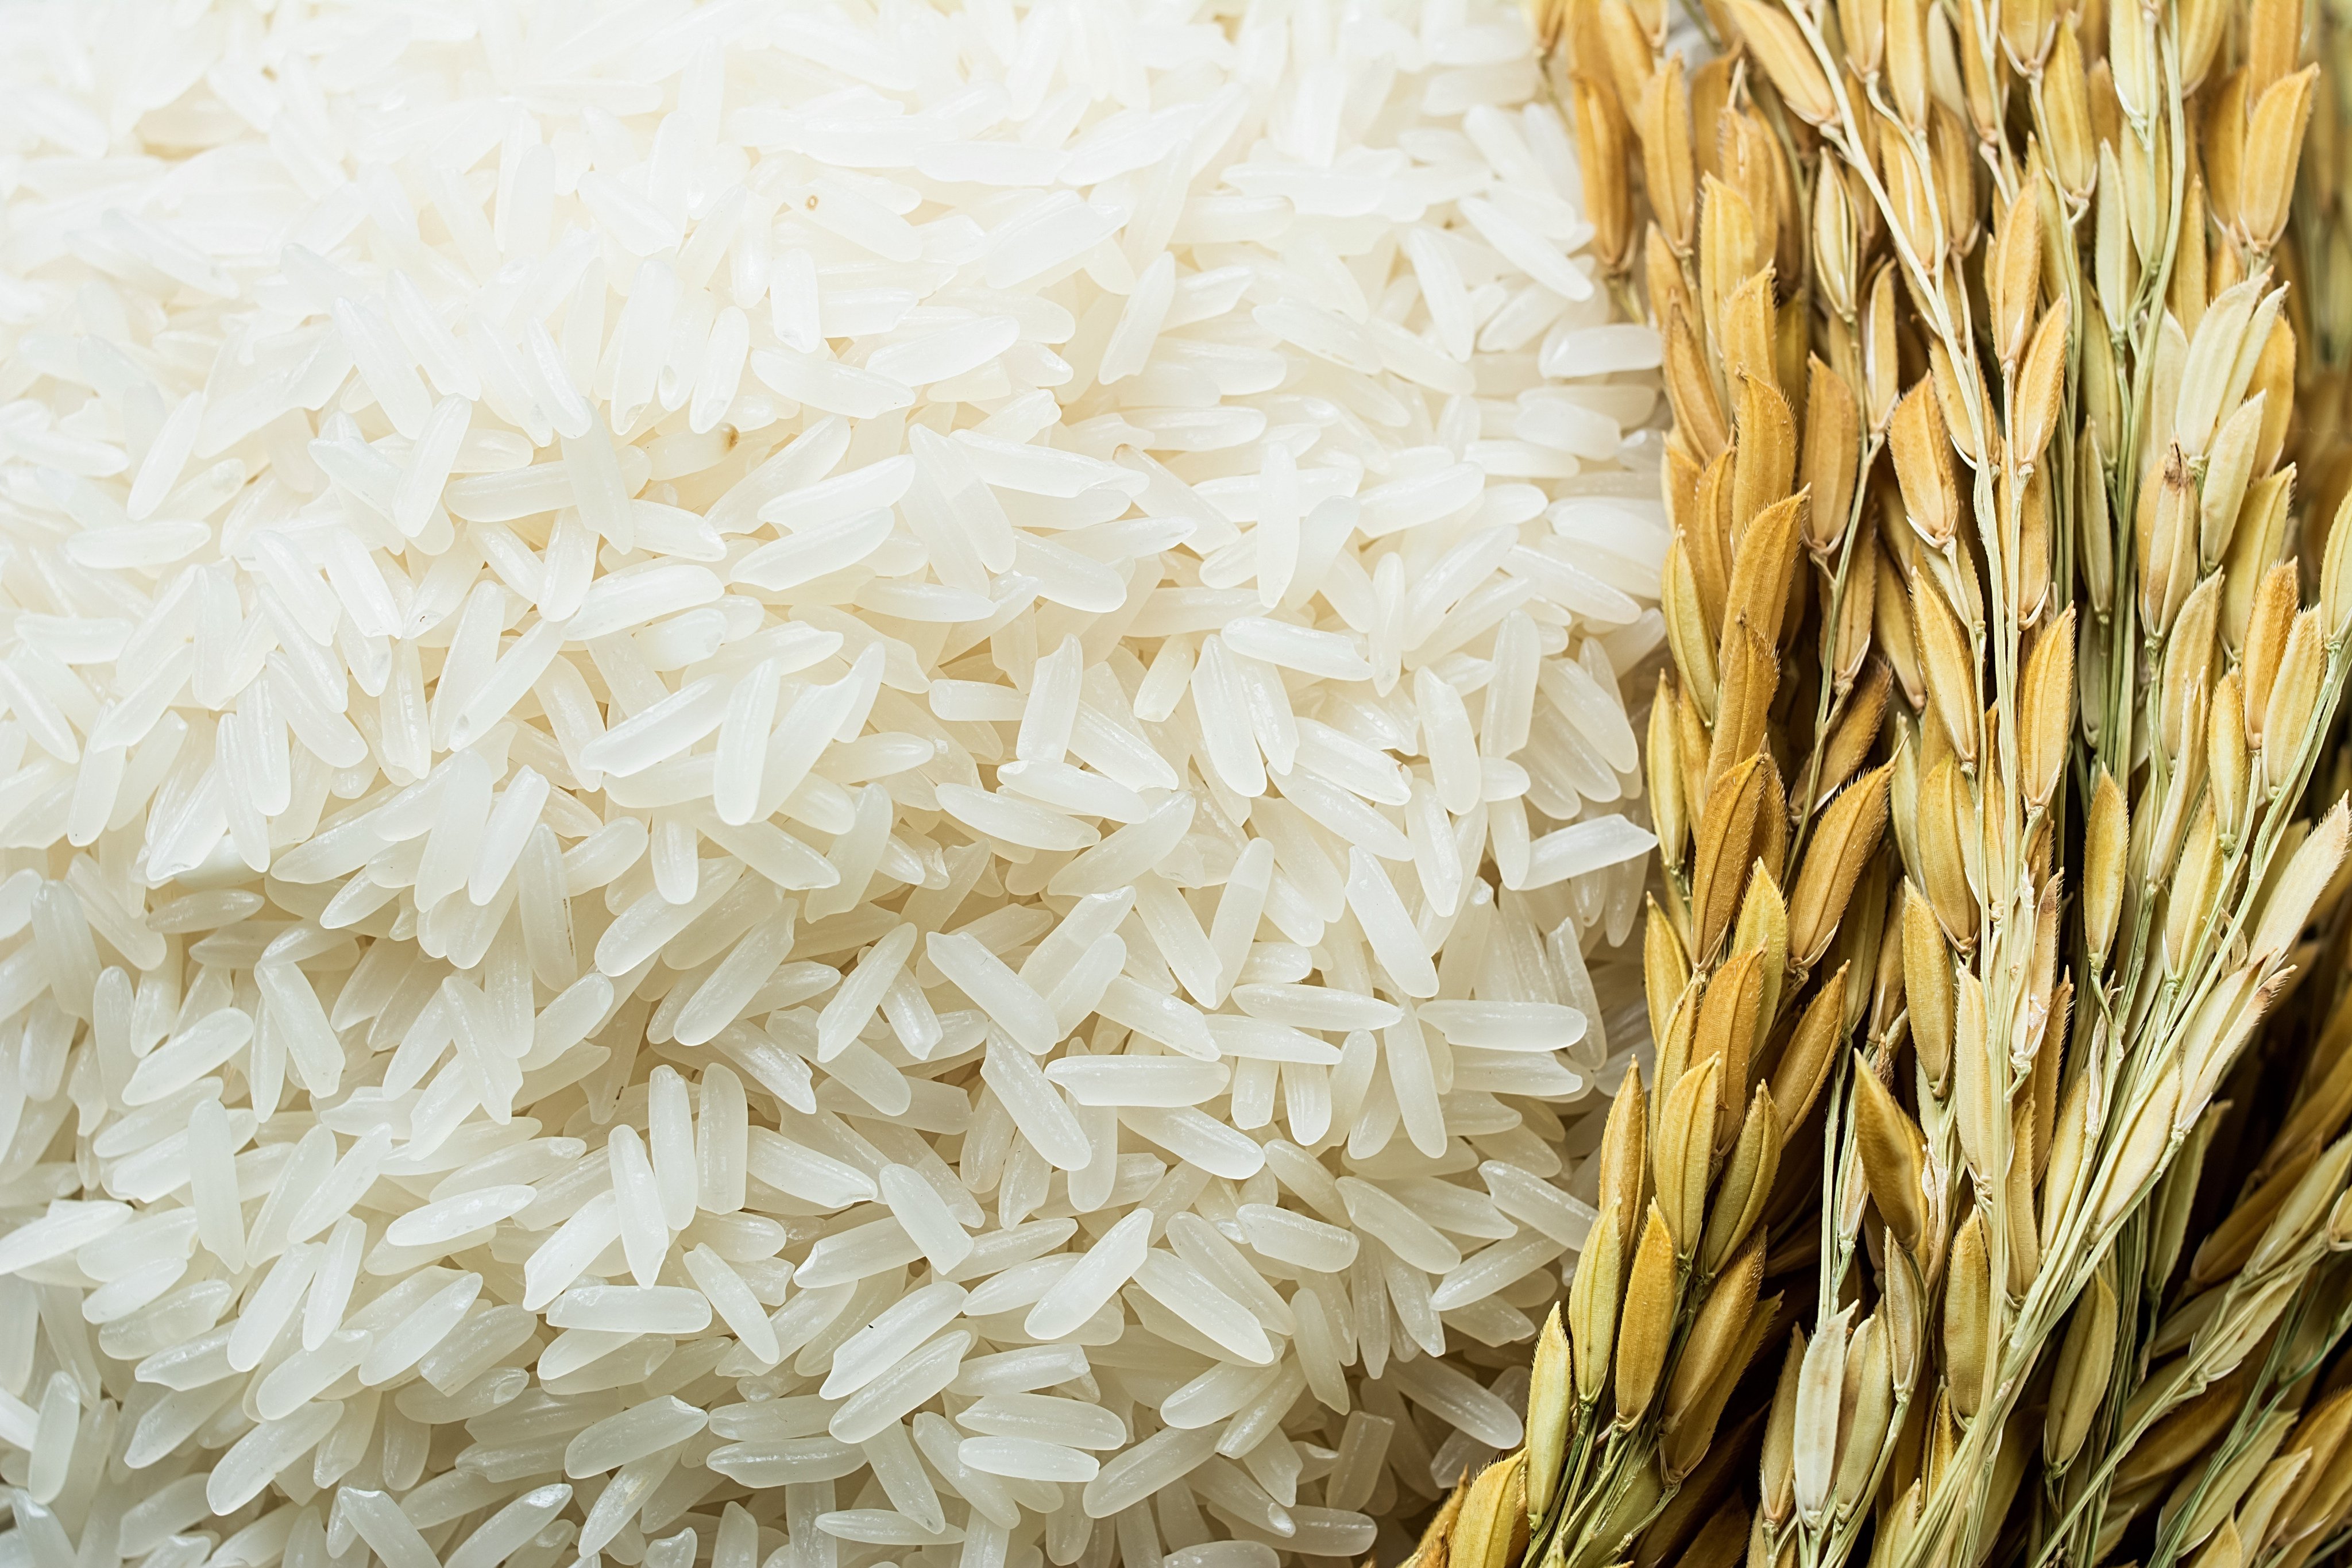 Long grain of rice and rice. Photo: Shutterstock